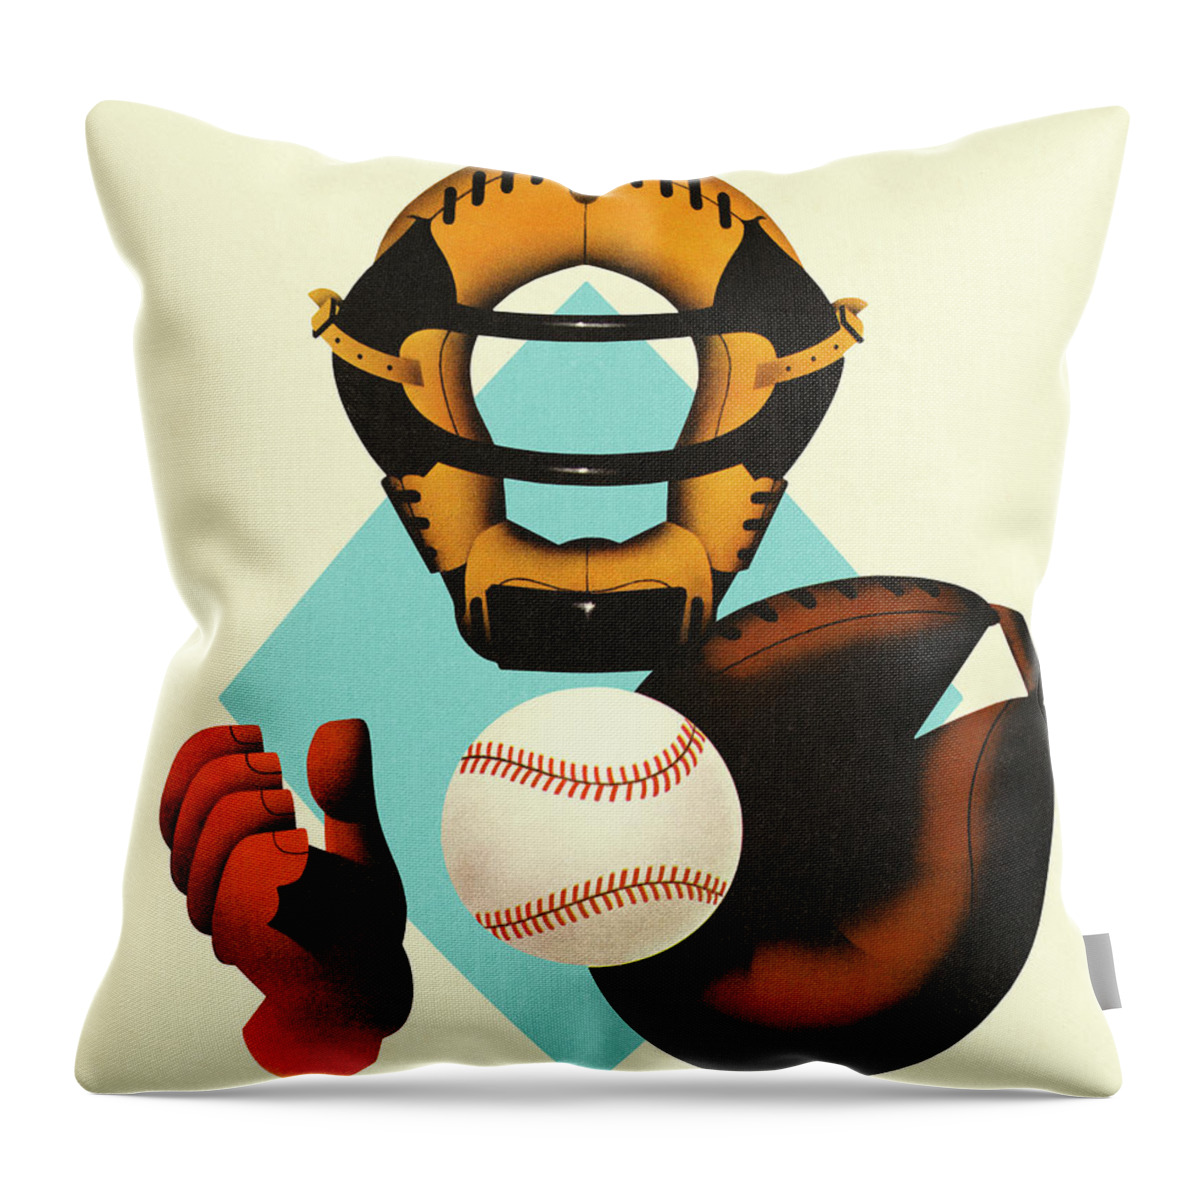 American Pastime Throw Pillow featuring the drawing Baseball Catcher Equipment by CSA Images